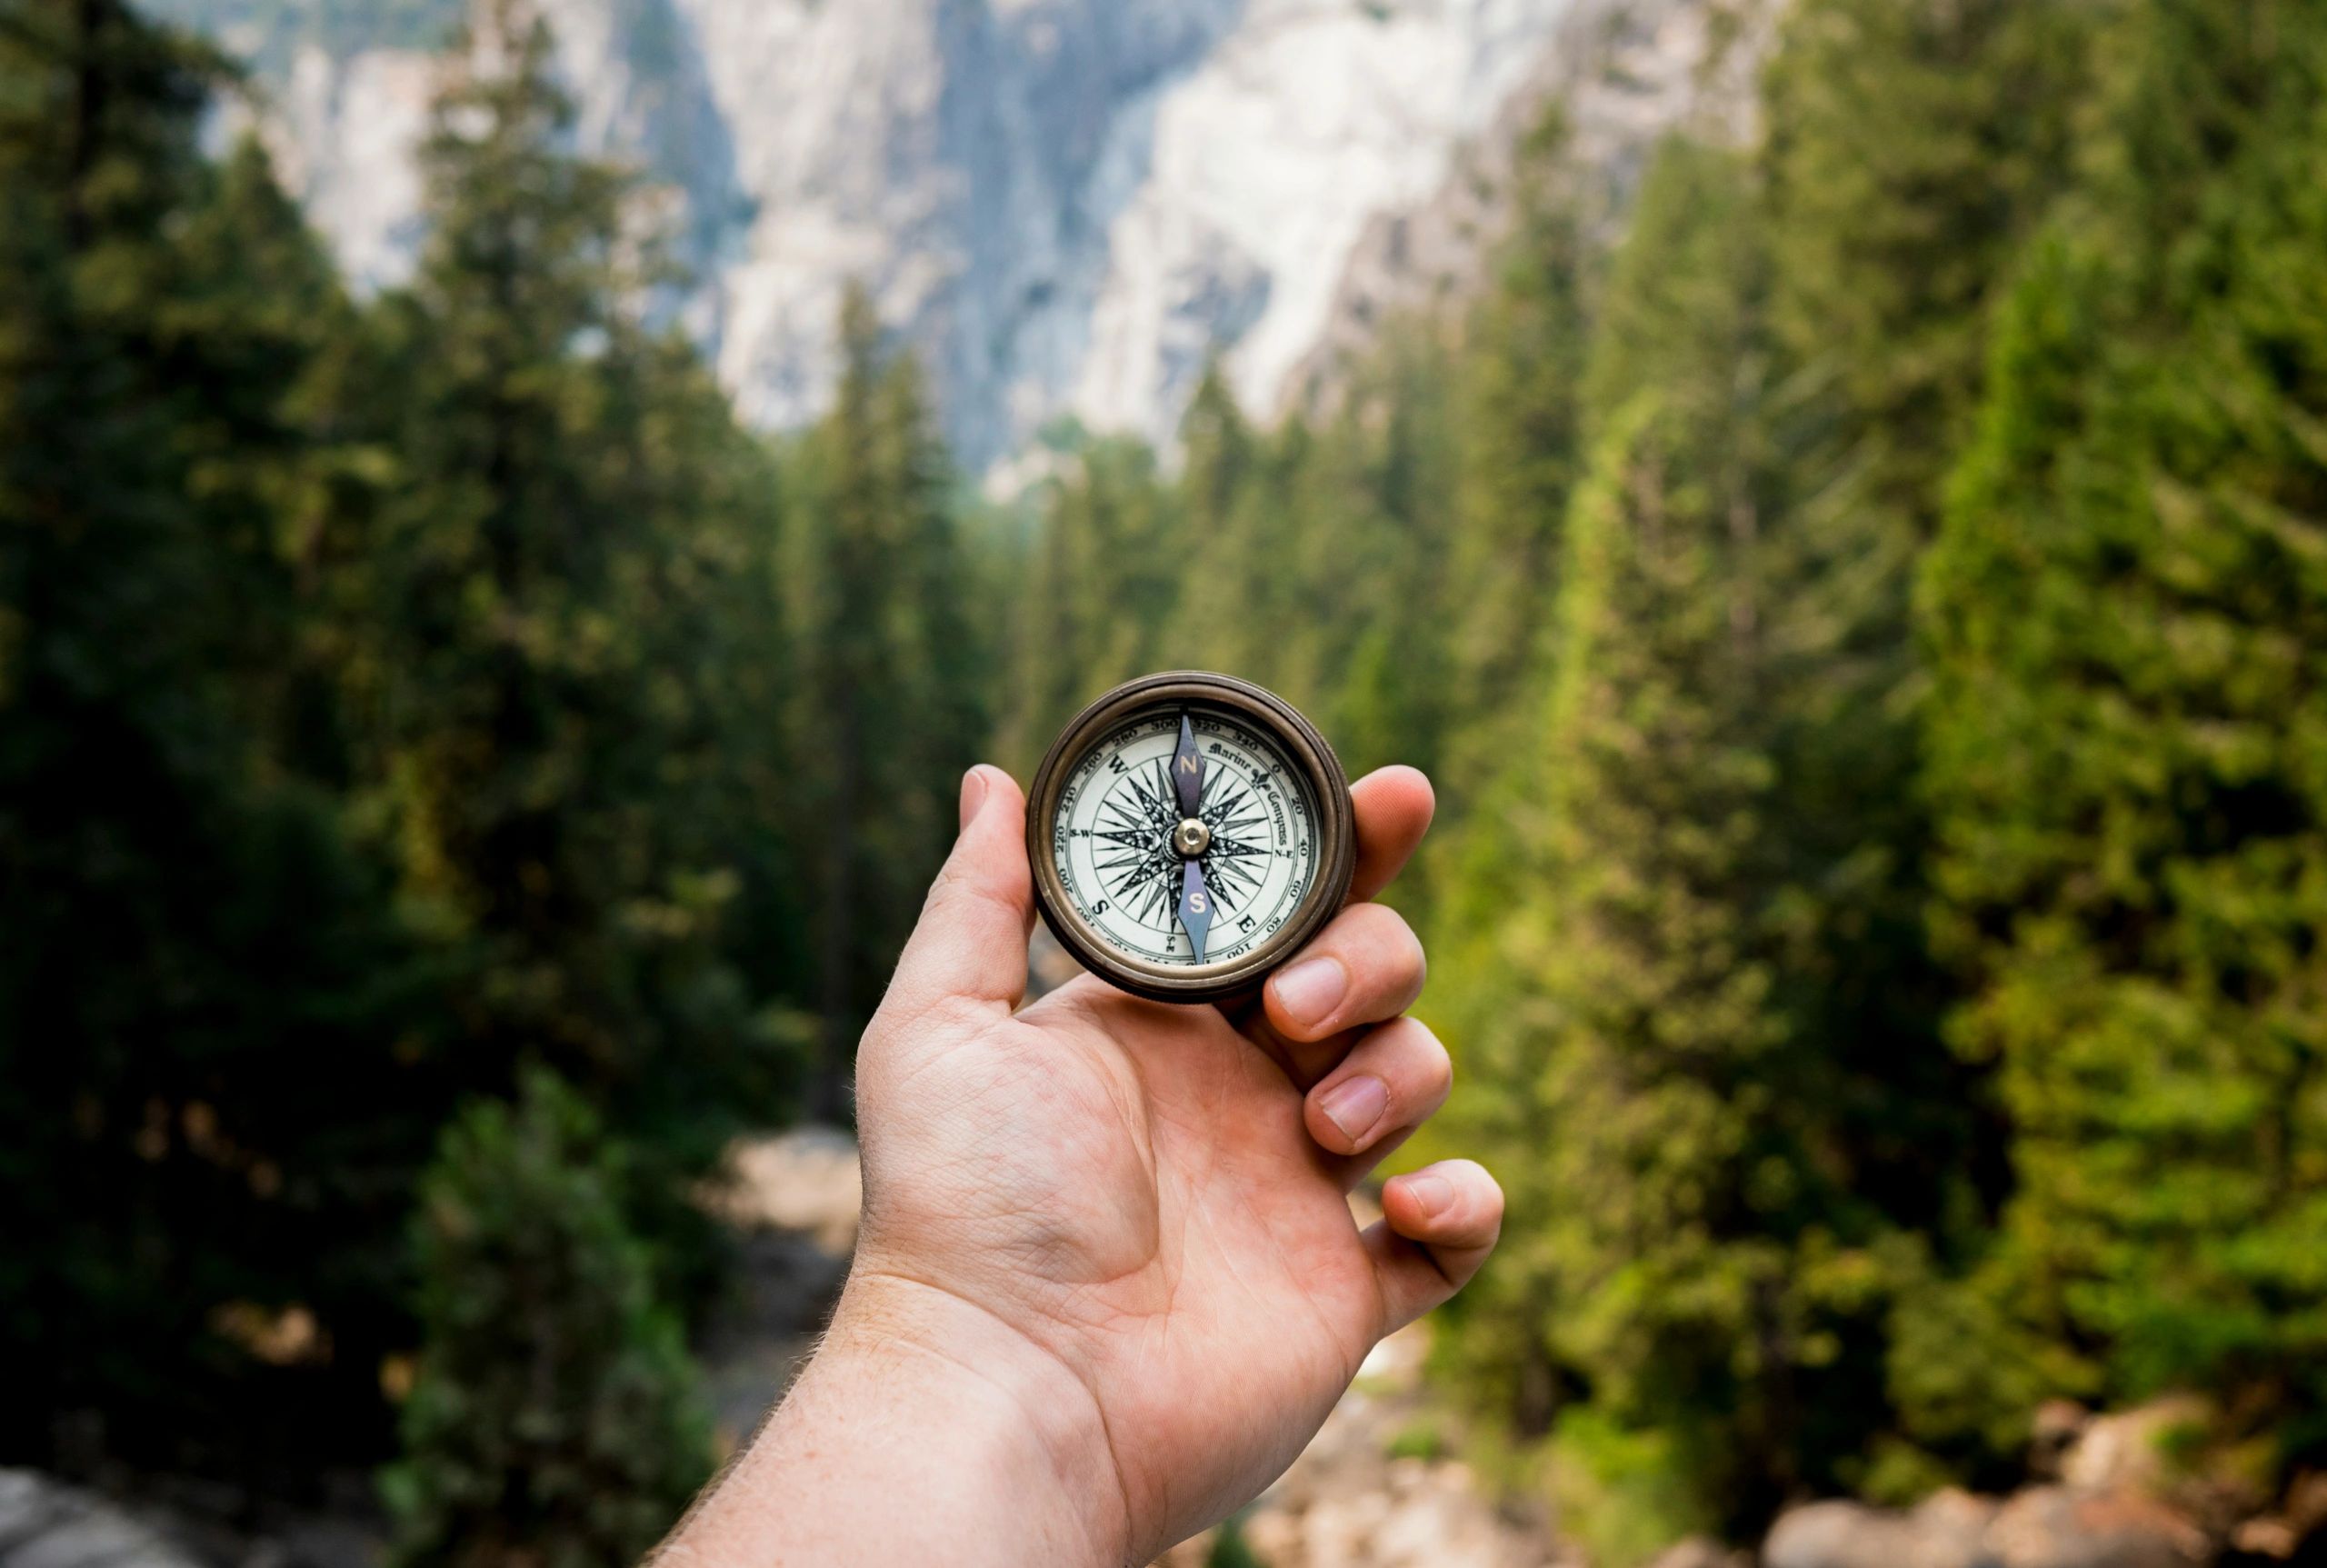 Photo by Jamie Street on Unsplash
person-holding-compass-facing-towards-green-pine-trees-_94HLr_QXo8